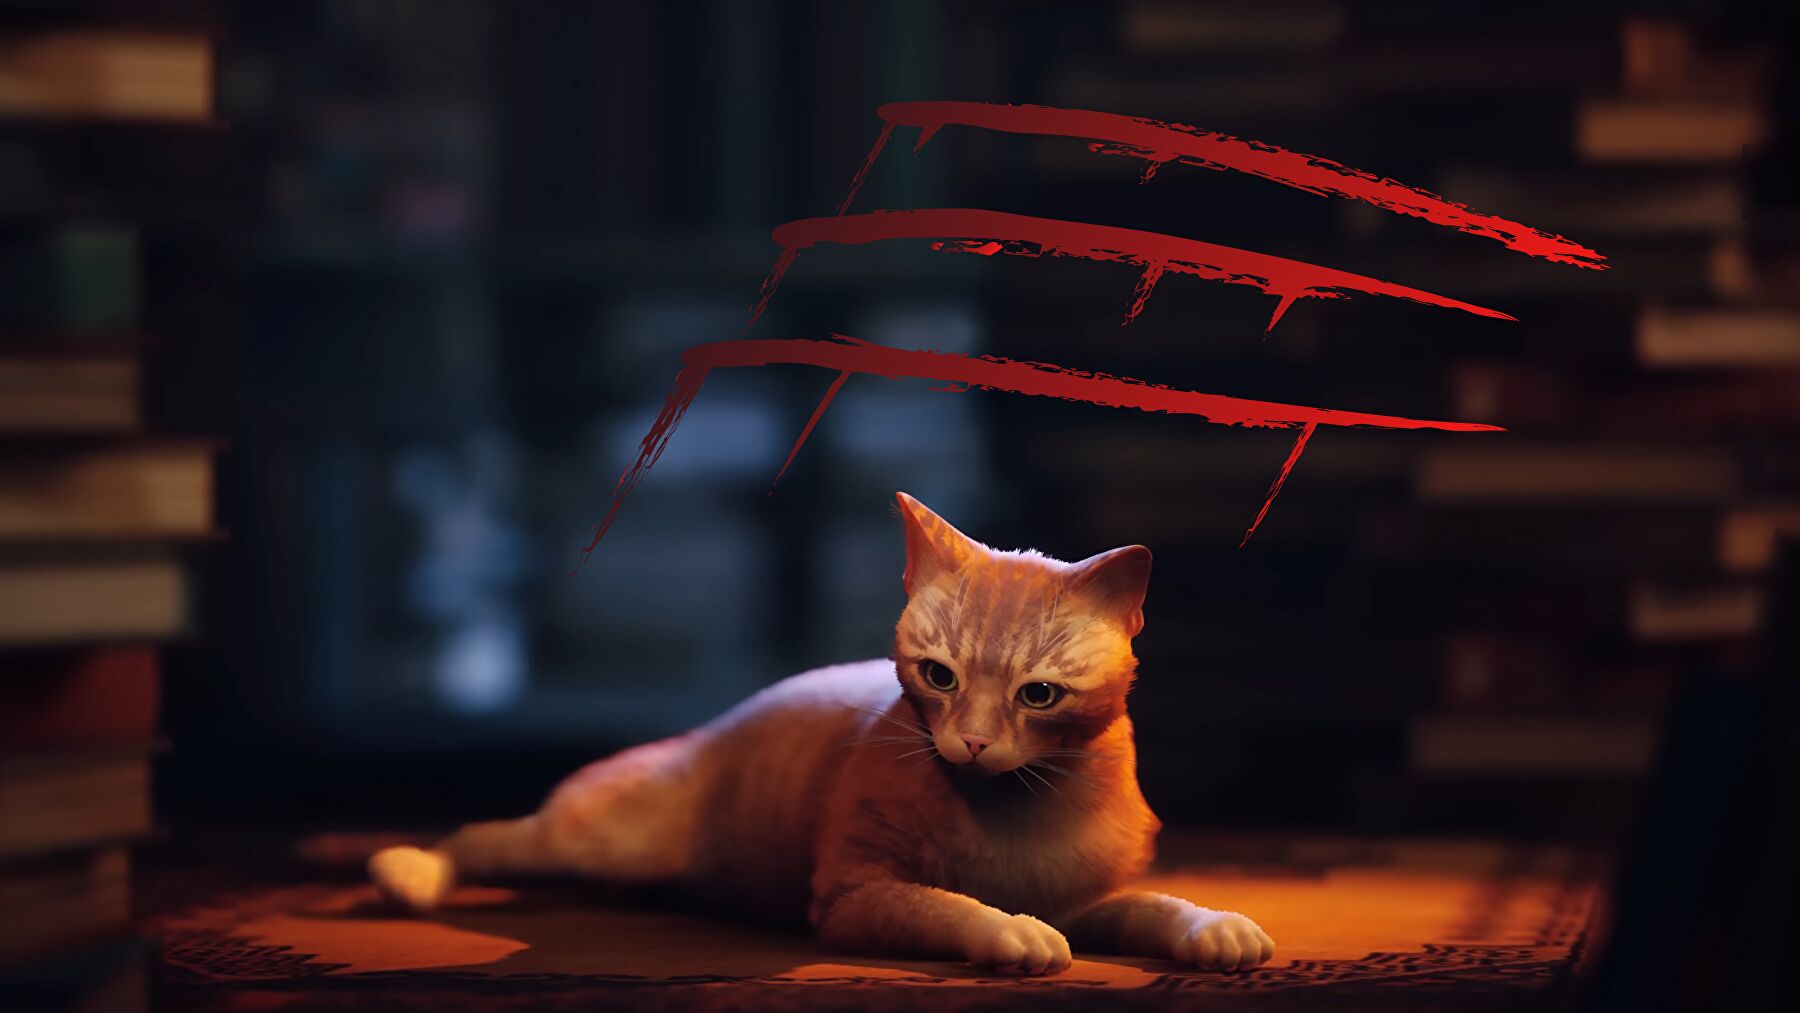 Doom Gets Fluffy: This mod turns the stray cat into a killer